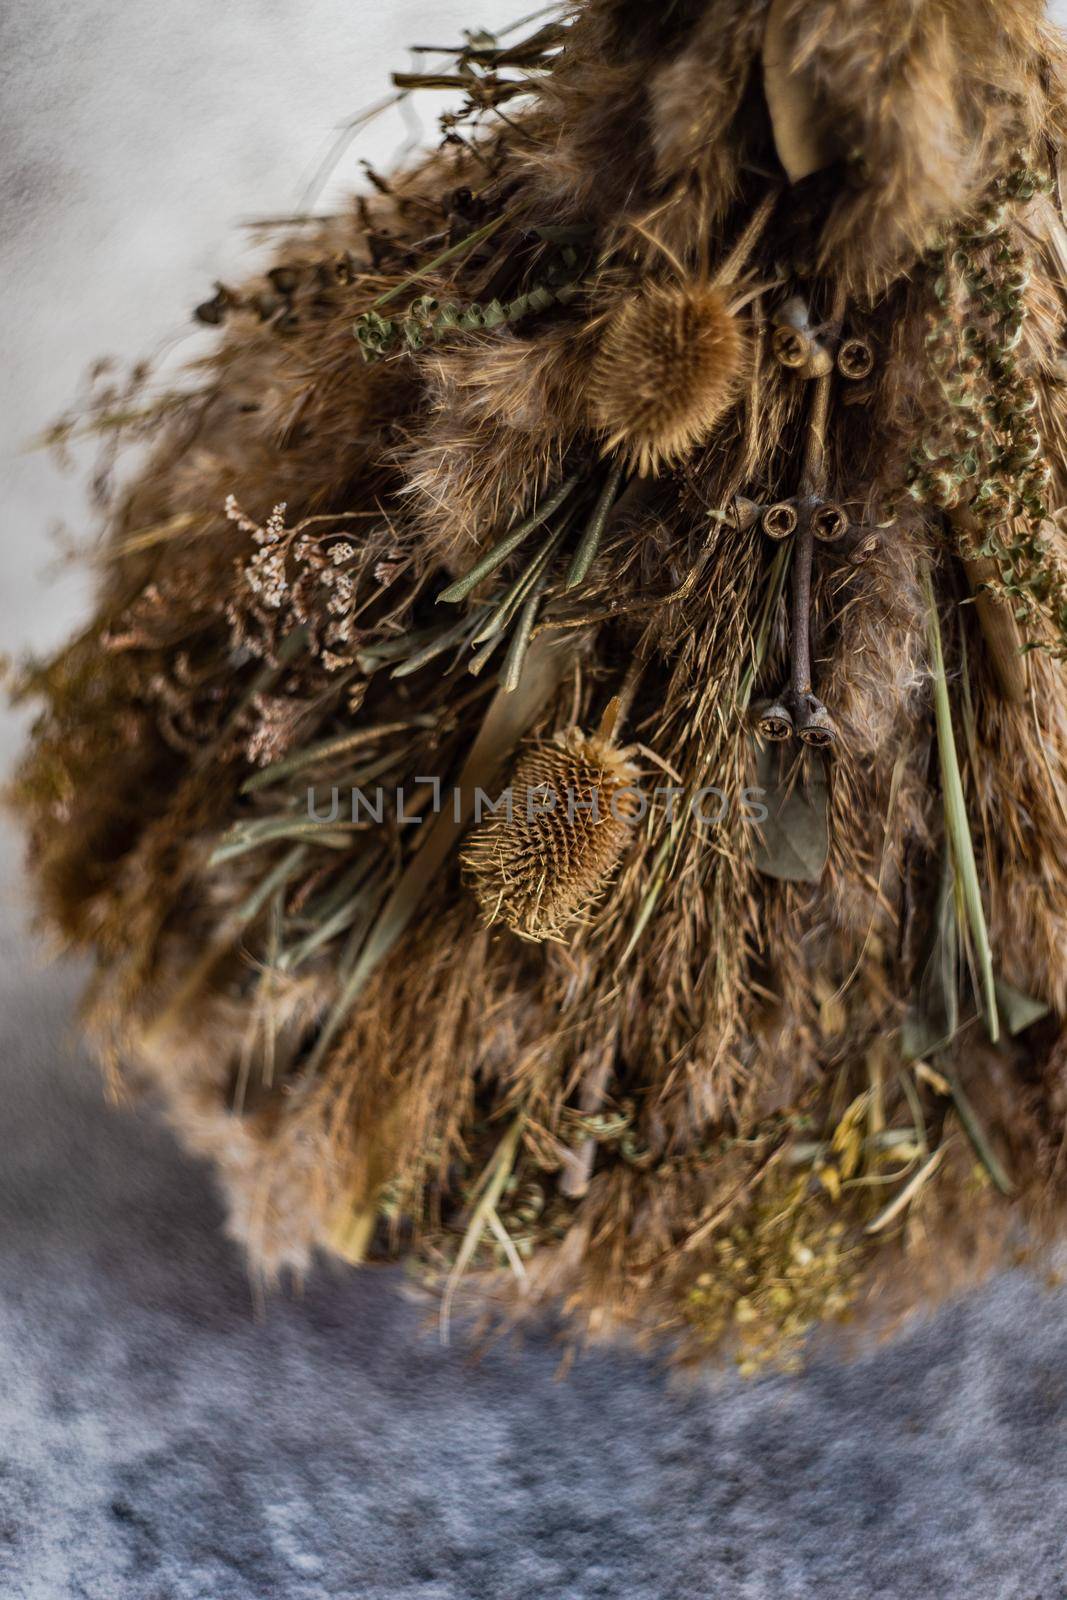 Christmas interior decoration with xmas tree made with dry grass, branches and leaves